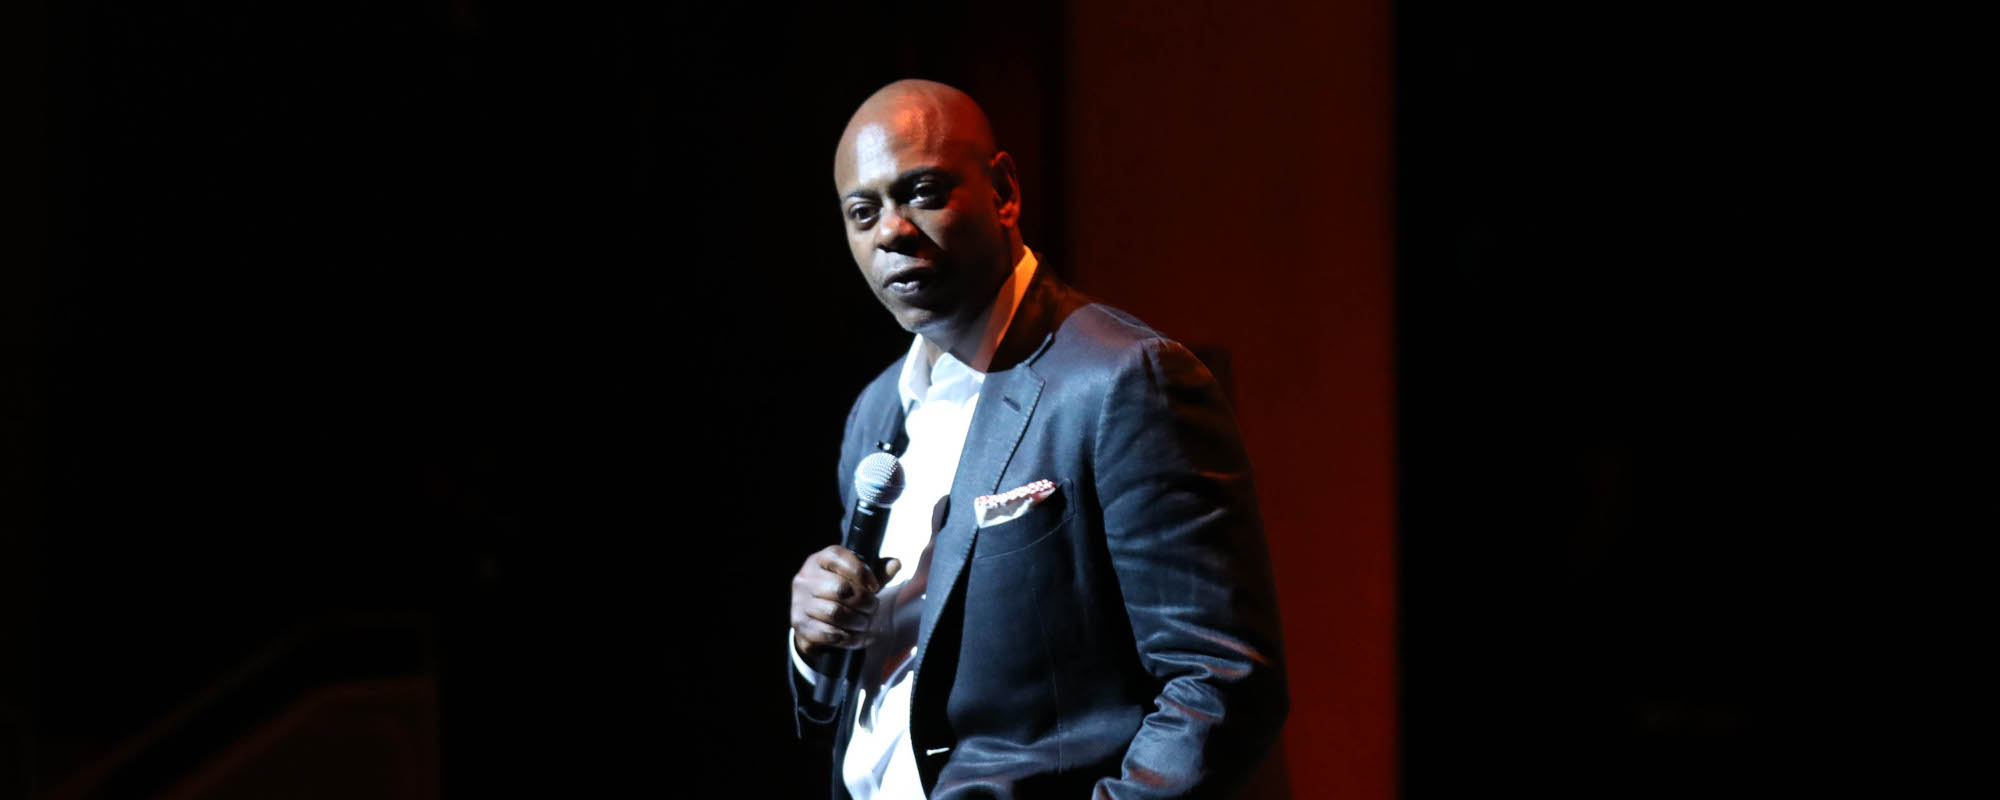 3 Songs You Didn’t Know Featured Dave Chappelle